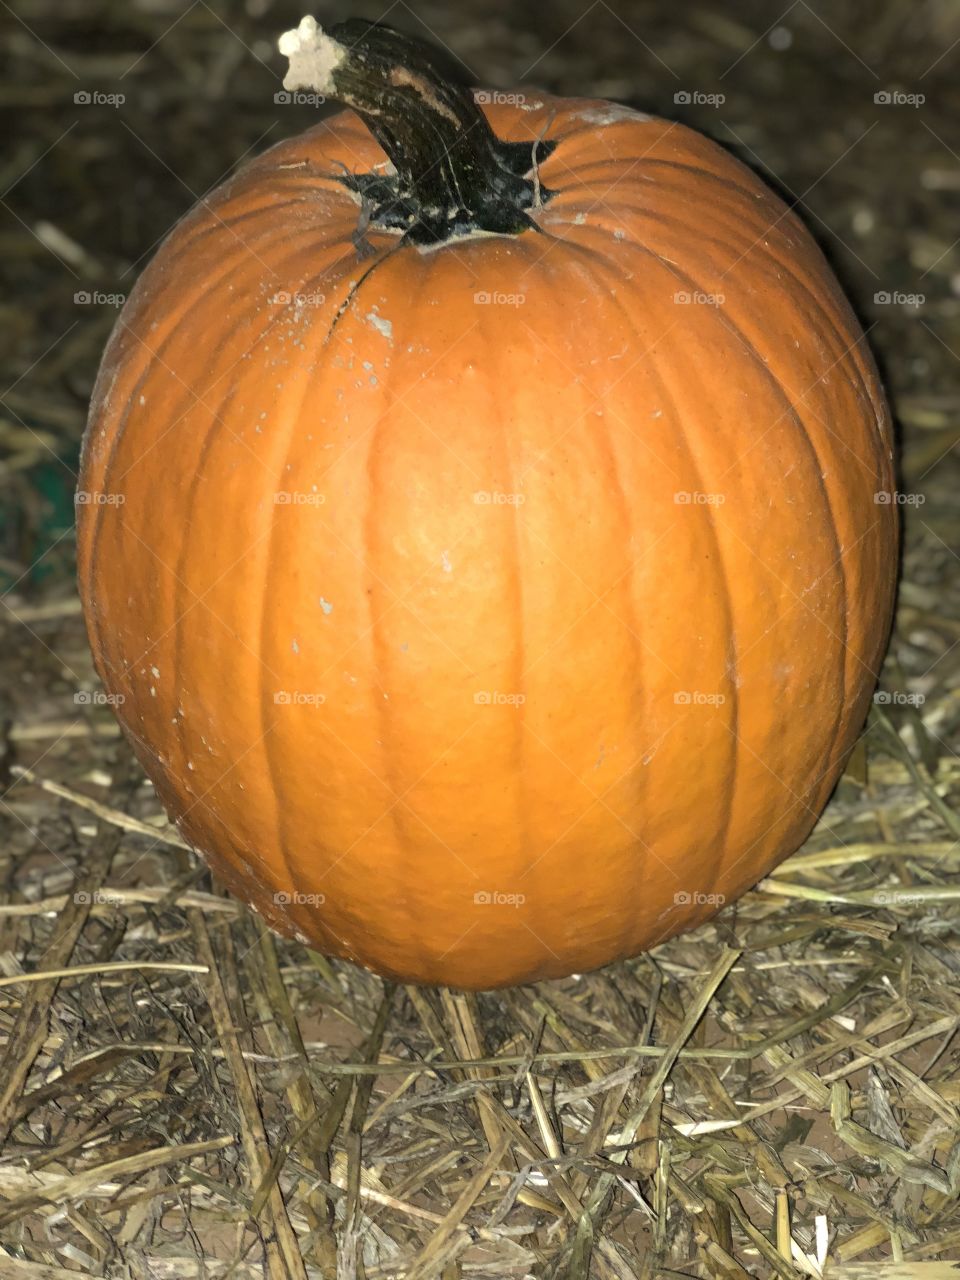 The Great Giant Pumpkin